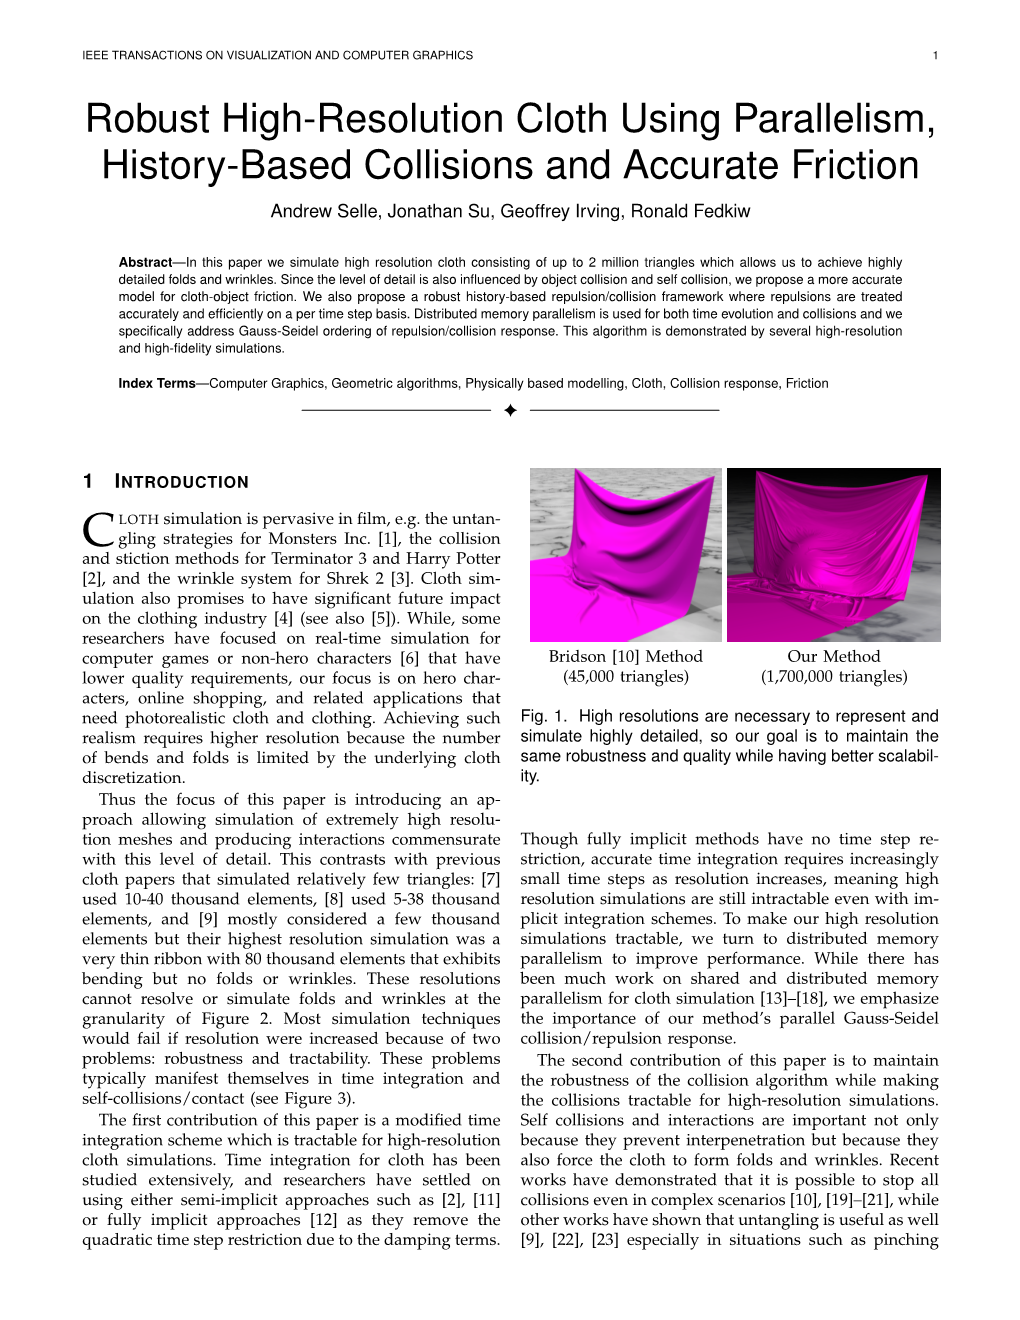 Robust High-Resolution Cloth Using Parallelism, History-Based Collisions and Accurate Friction Andrew Selle, Jonathan Su, Geoffrey Irving, Ronald Fedkiw